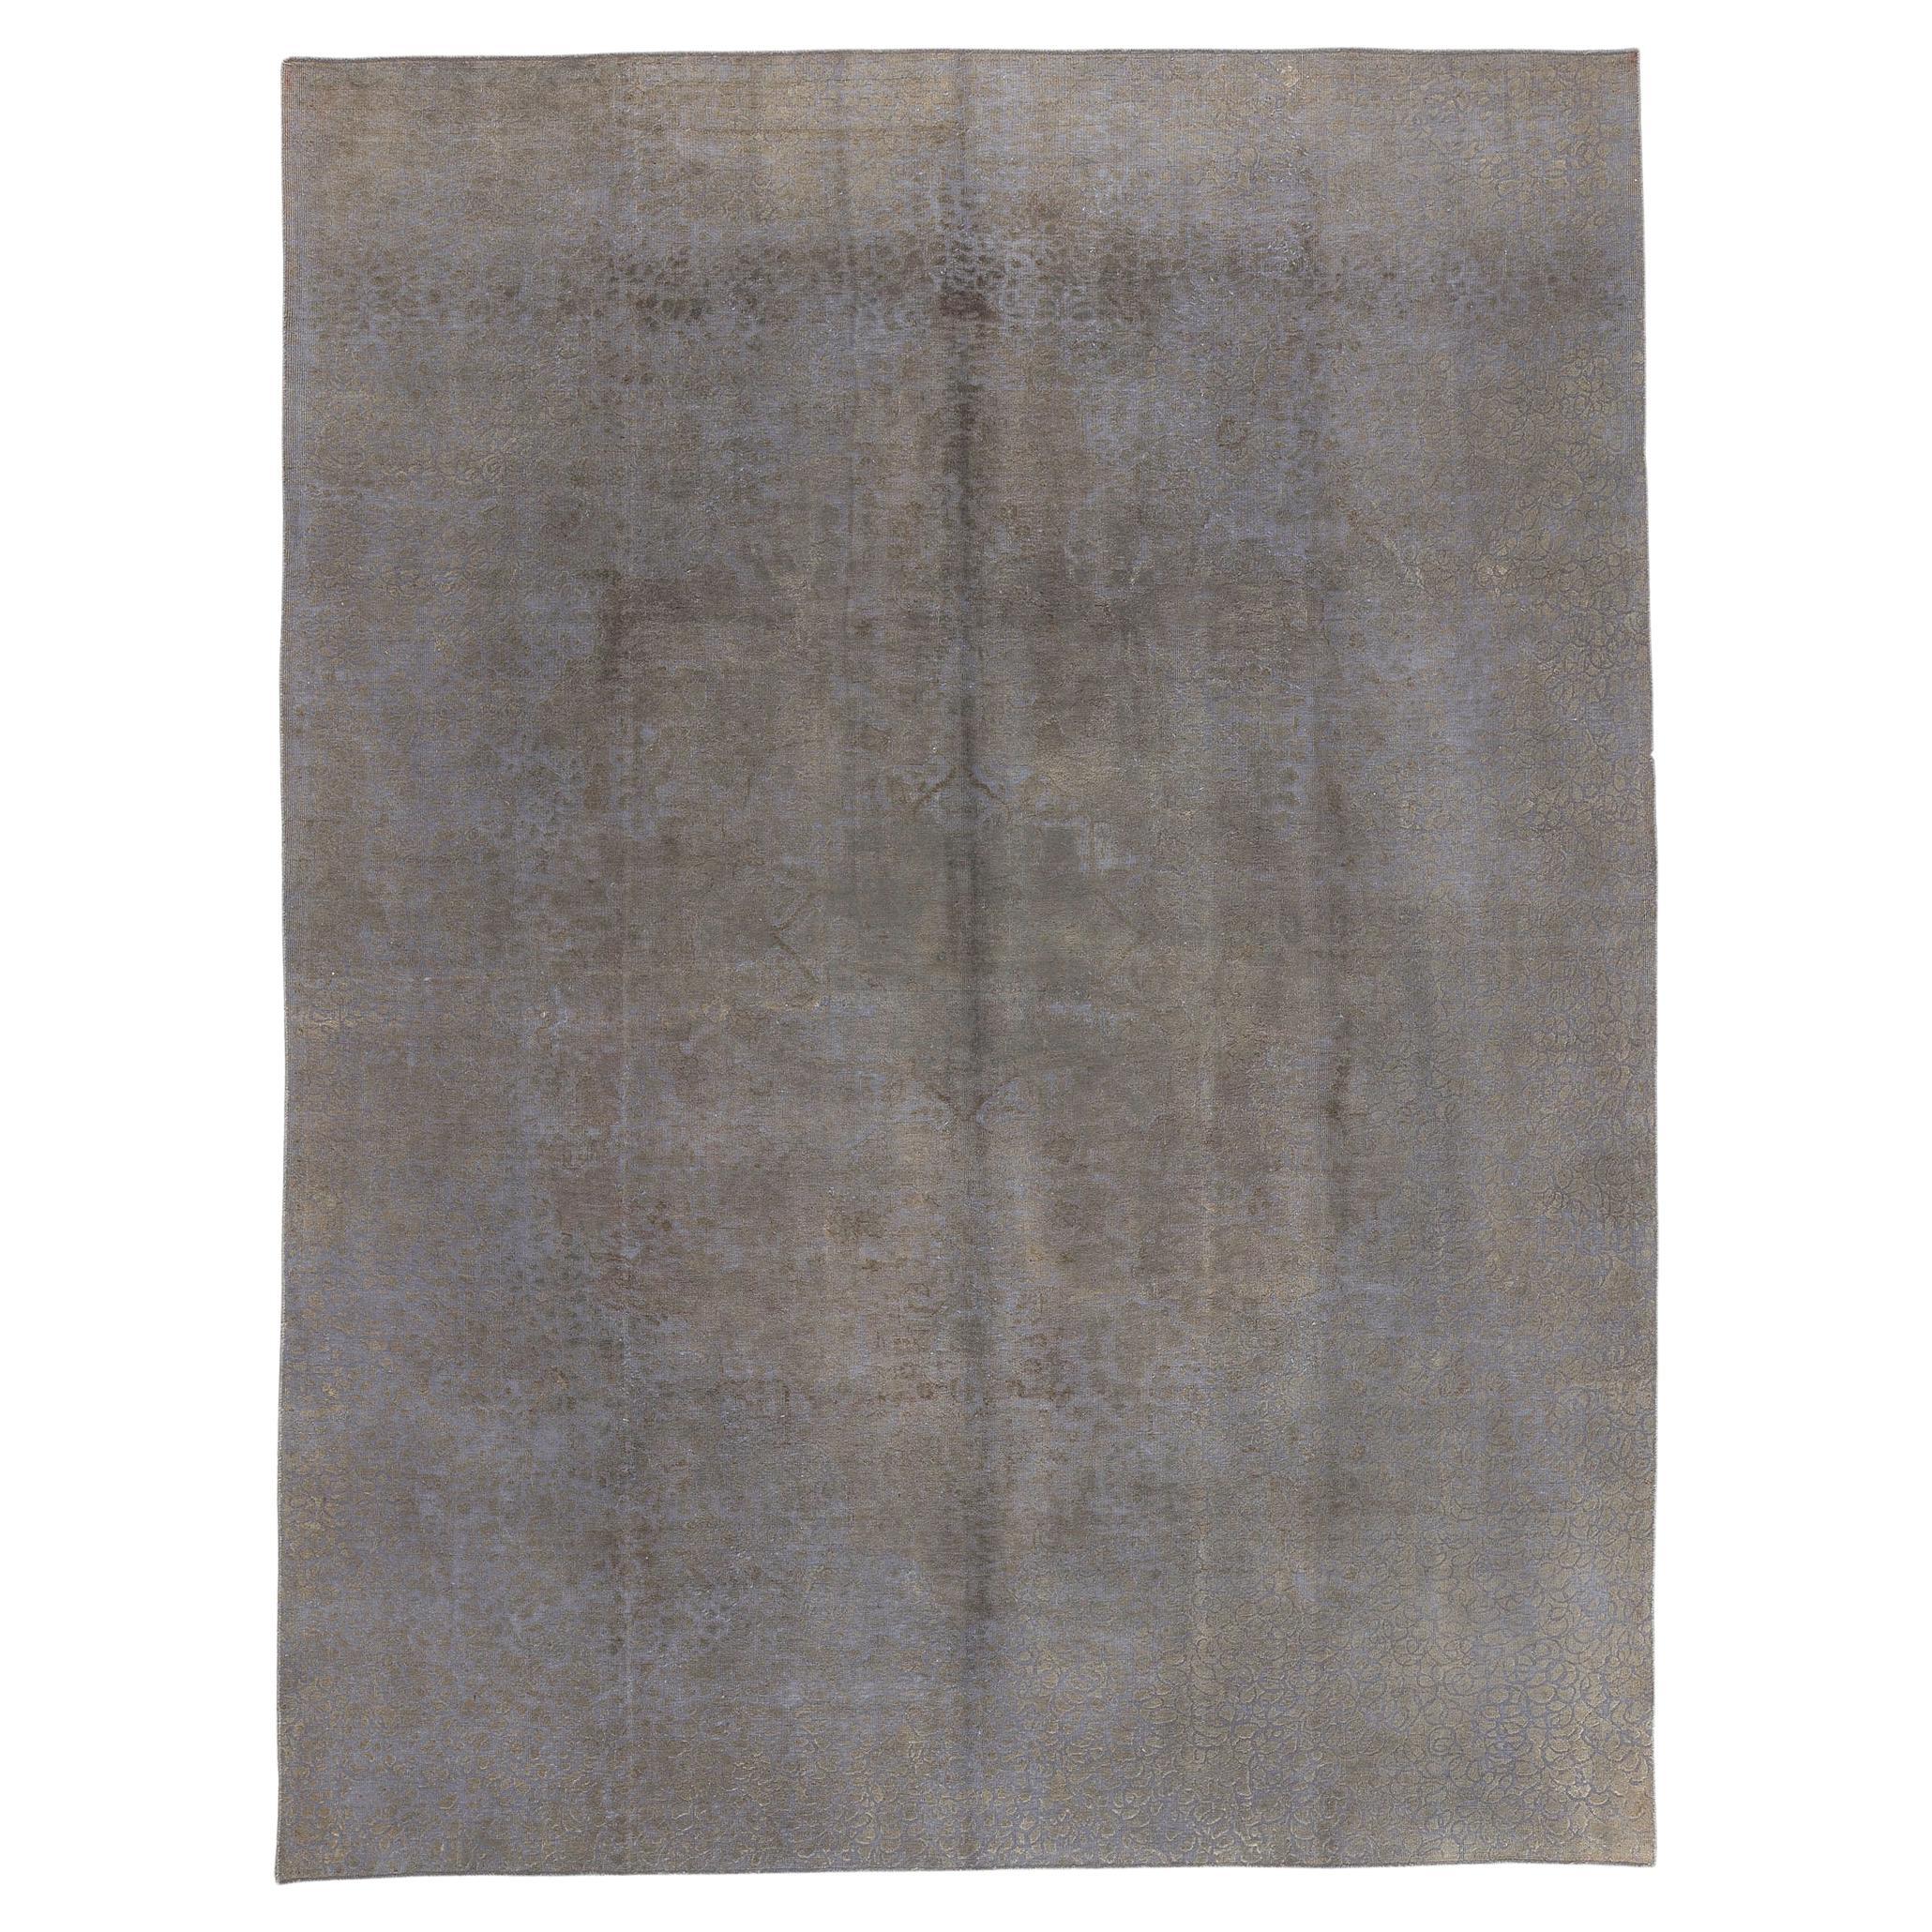 Vintage Turkish Overdyed Rug, The Brutalist Movement Meets Modern Industrial For Sale